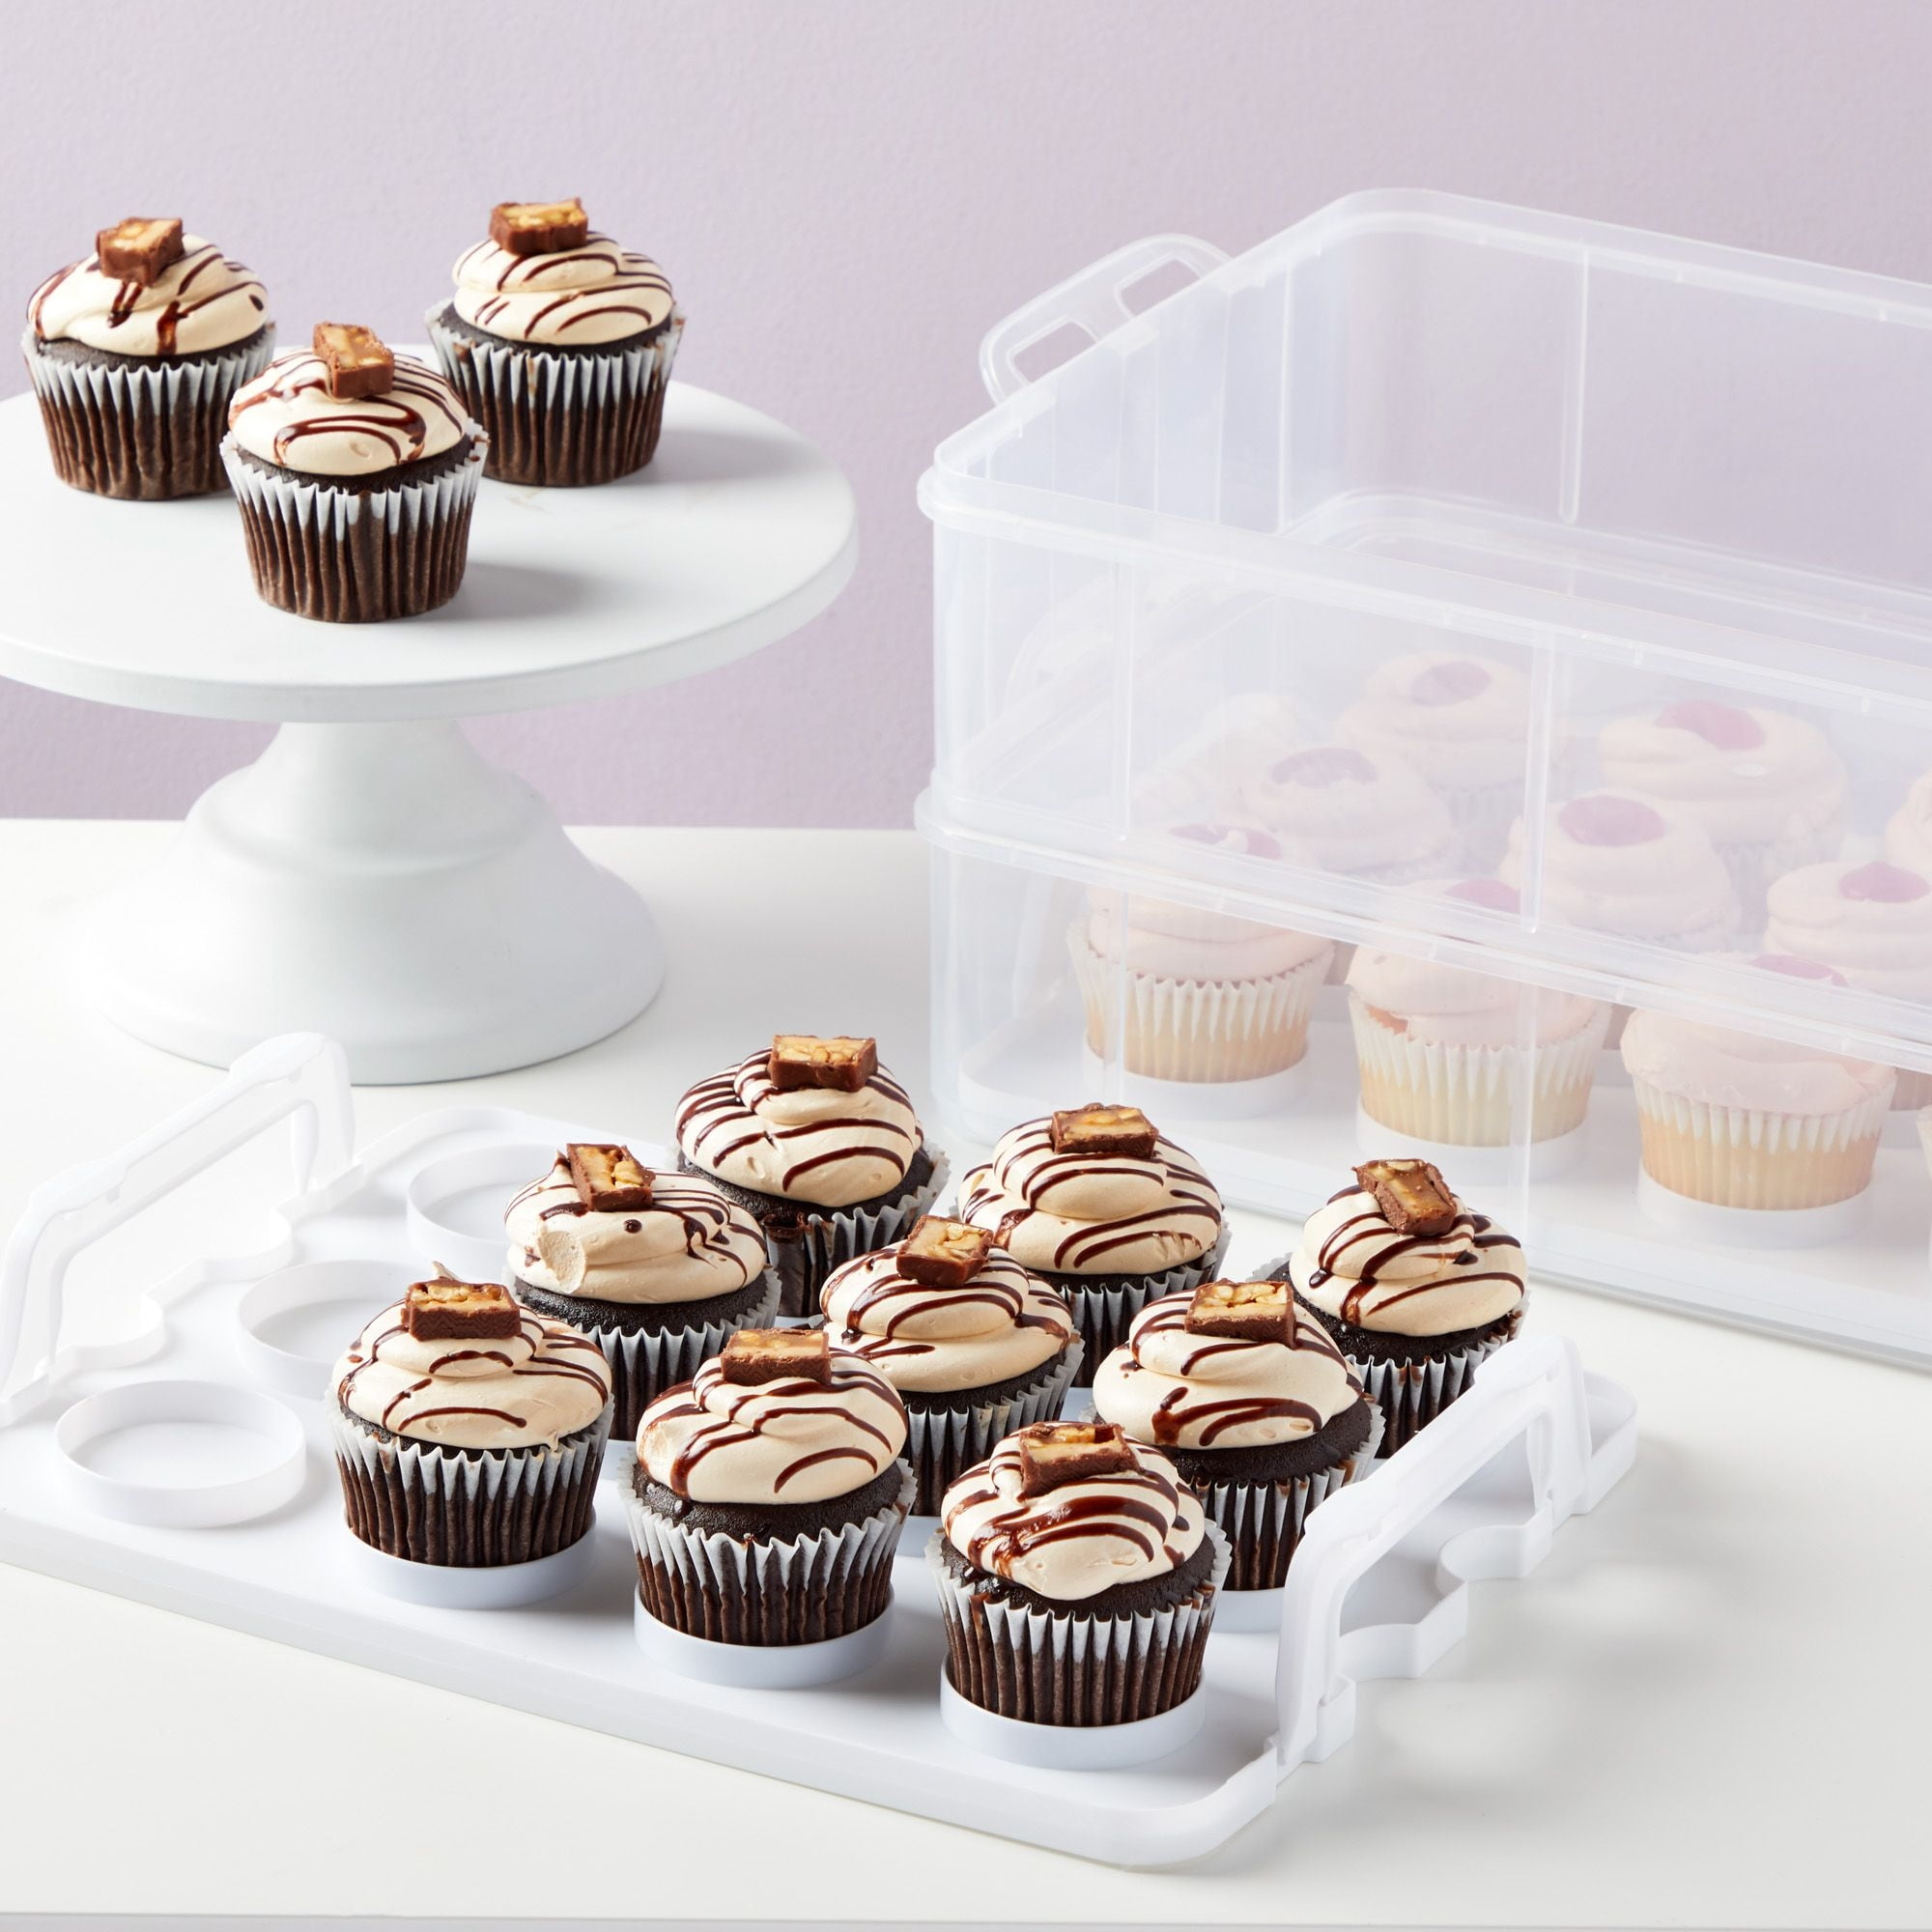 Flexzion Cupcake Carrier, Cupcake Holder for 24 Cupcakes, Portable and  Reusable Rectangular Cake Carrier with Lid and Handle, 2 Tier Stackable  Layer